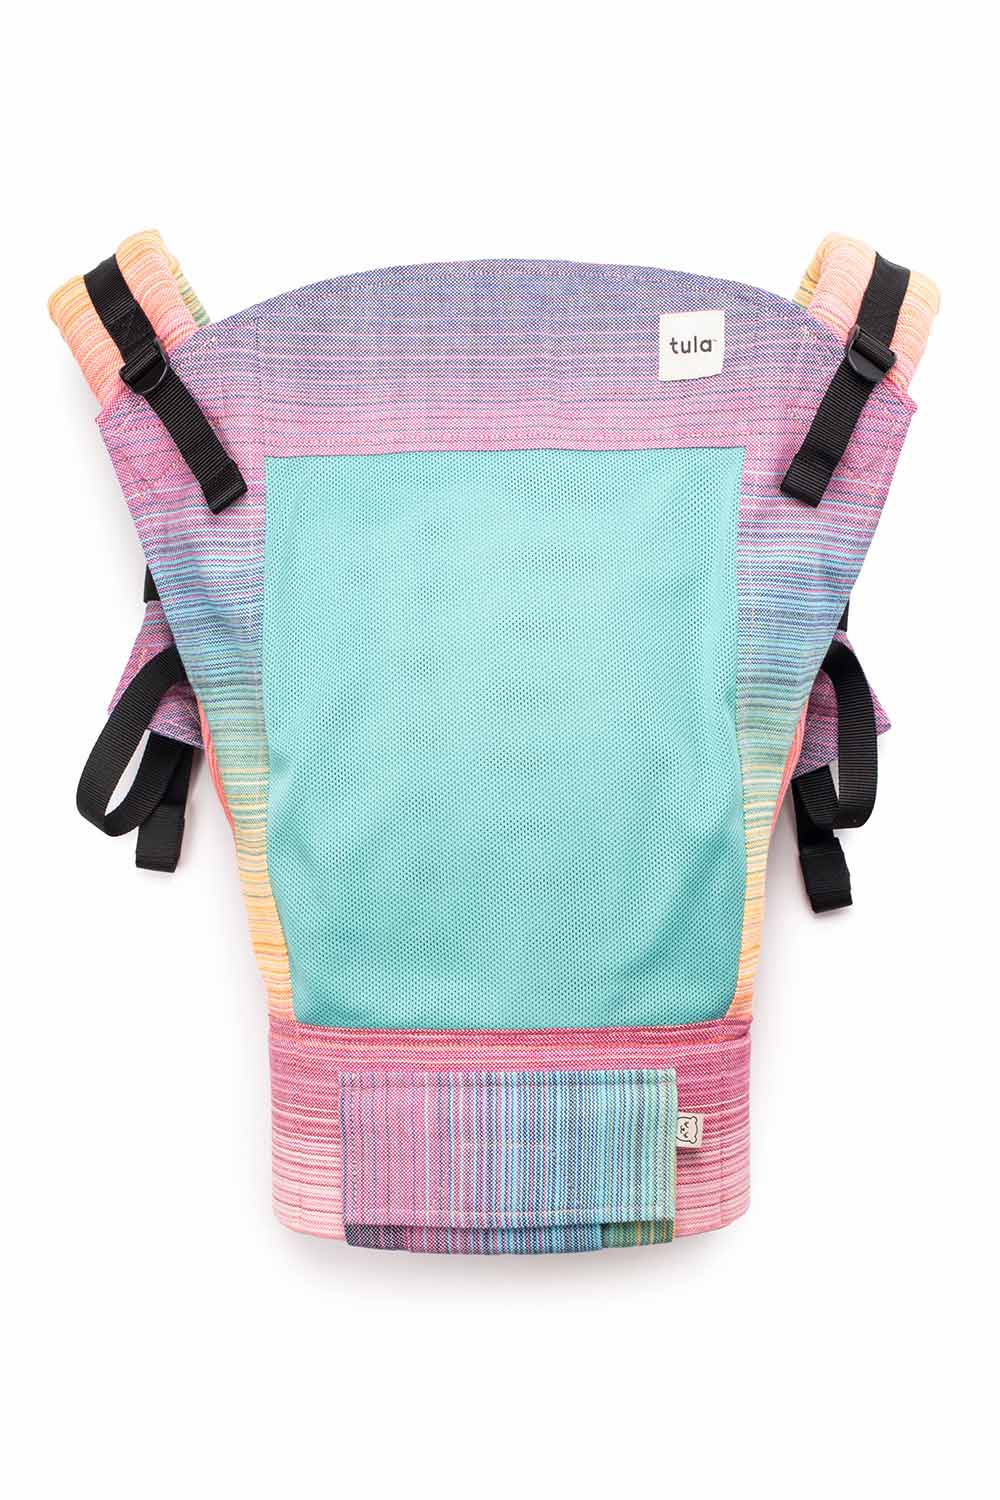 Goldie - Signature Handwoven Toddler Mesh Carrier